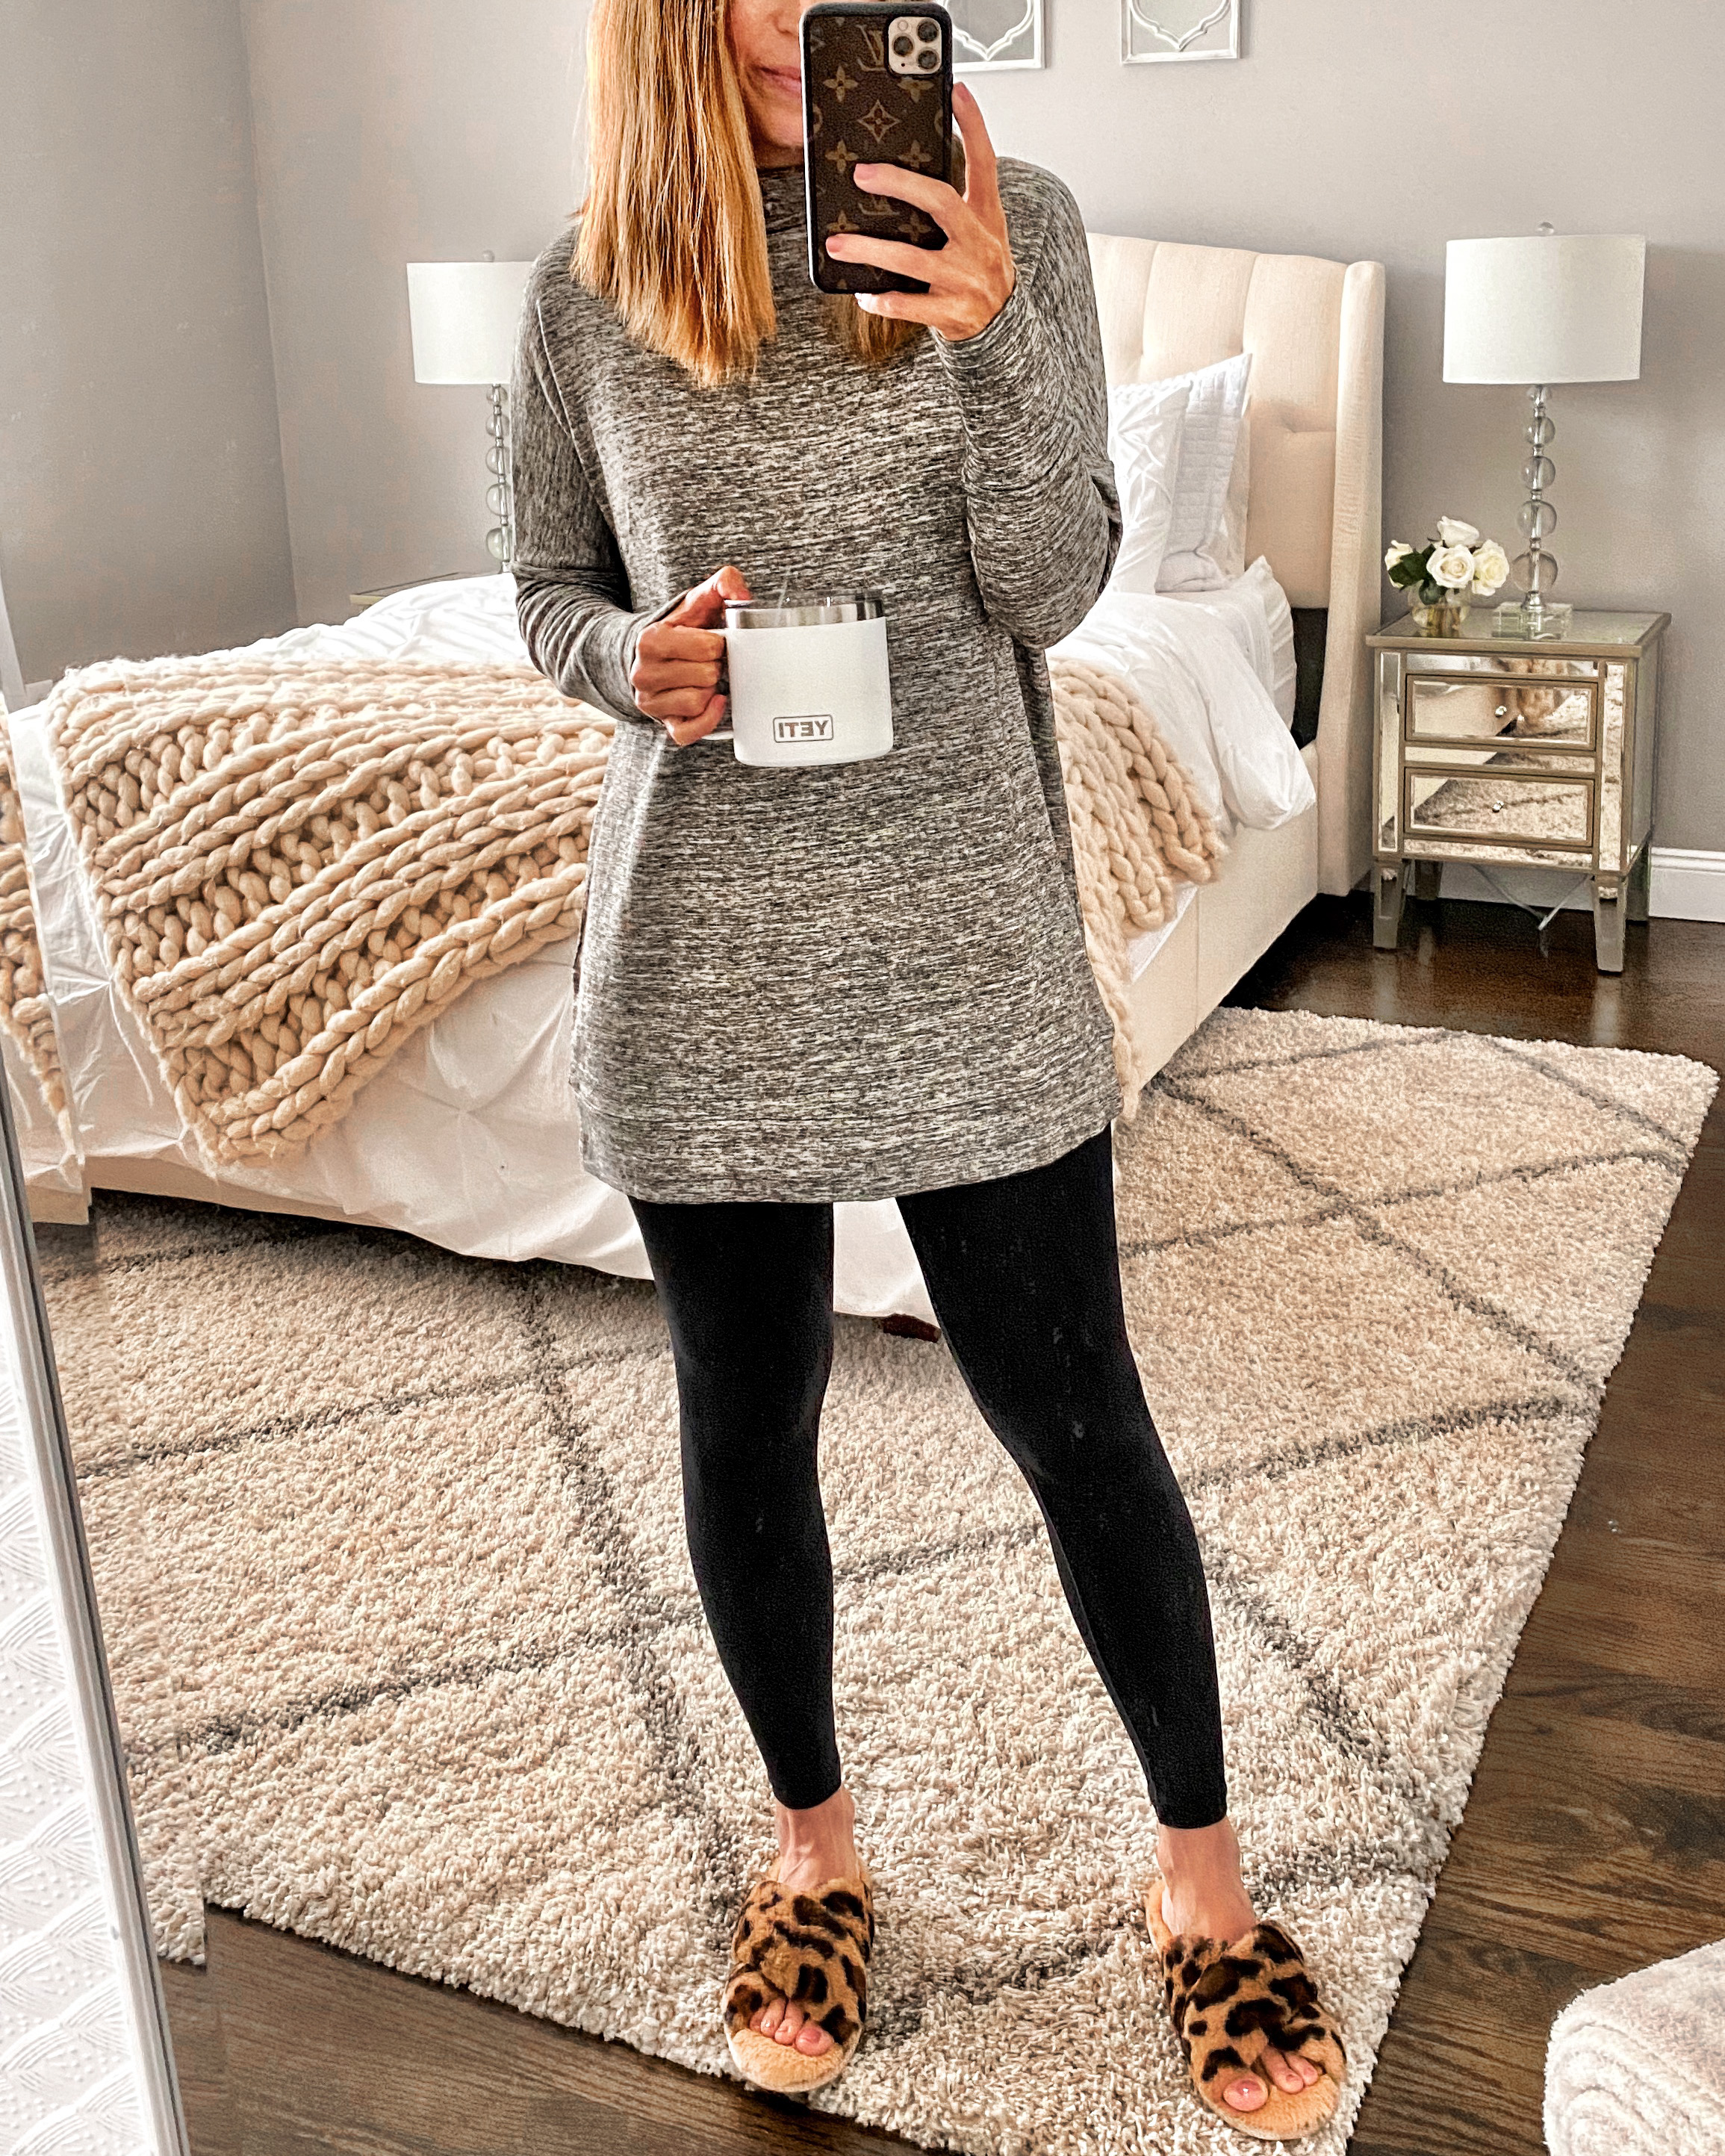 10 Leggings Outfit Ideas MrsCasual